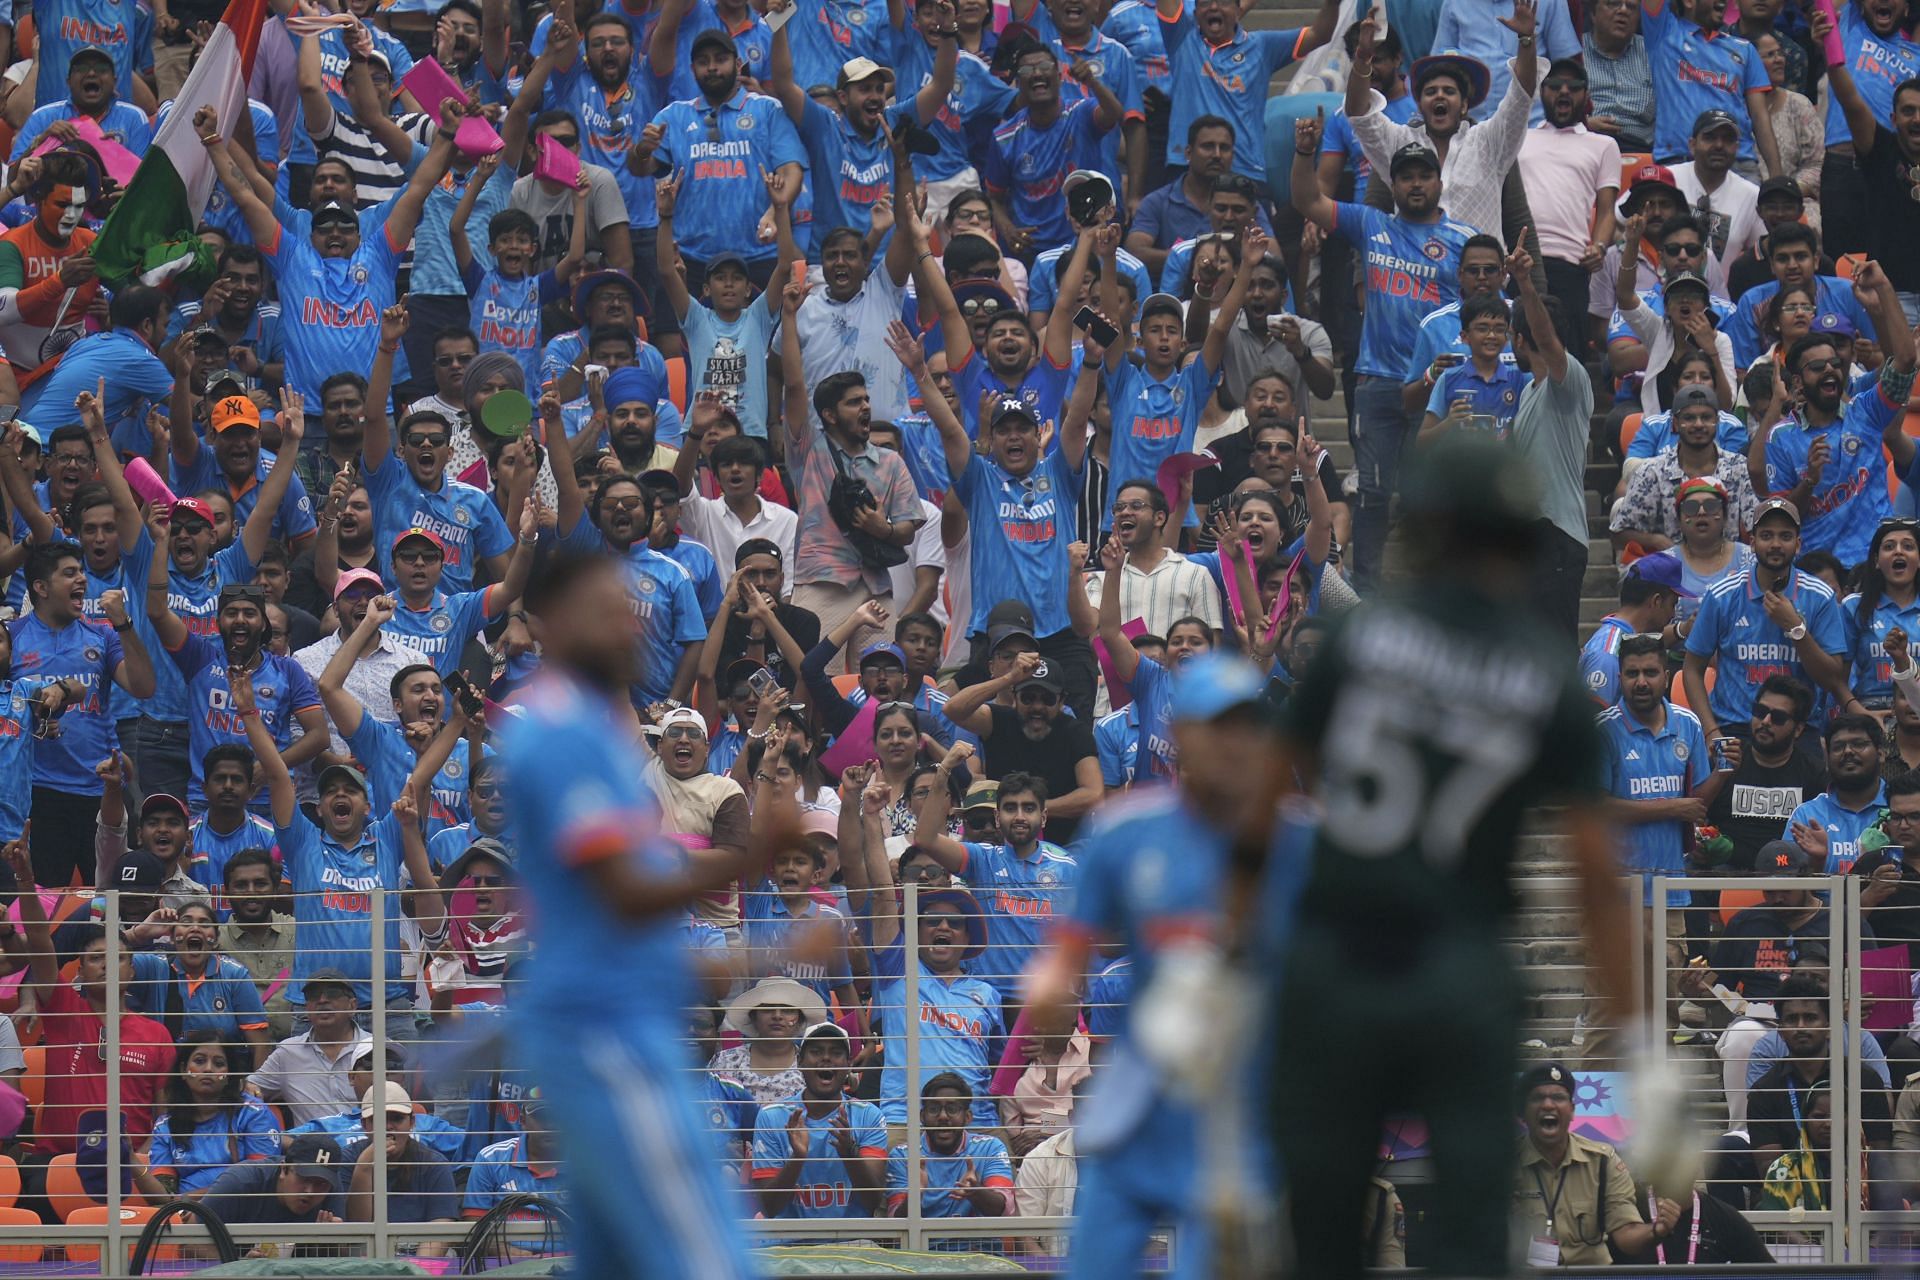 Indian fans cheer after a Pakistan wicket falls during the World Cup match. (Pic: AP)